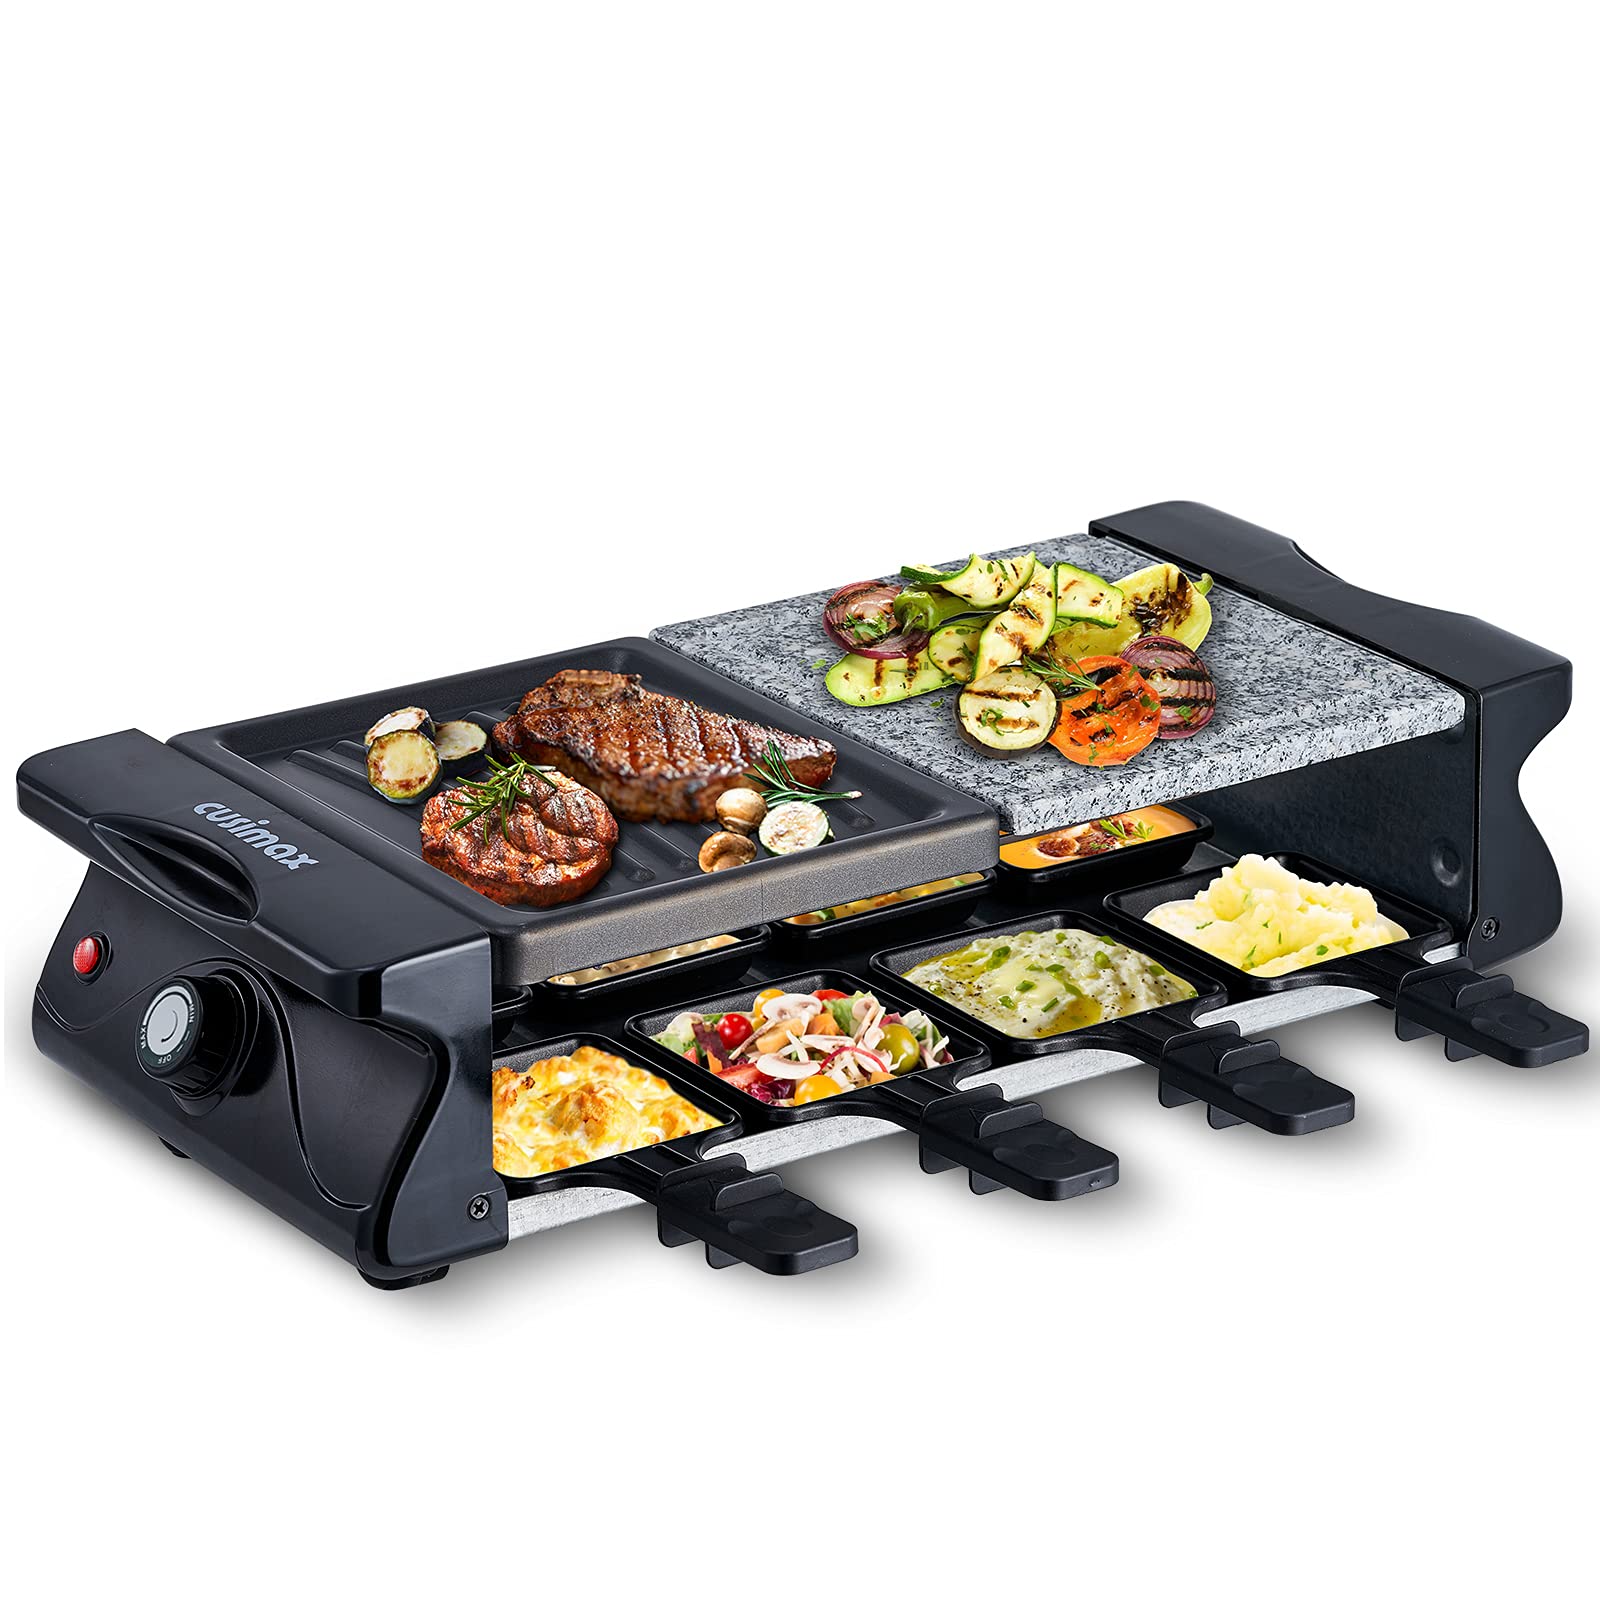 Cusimax 1200W Indoor Grill with Two Plates (Grill and Half Stone) Serves 8